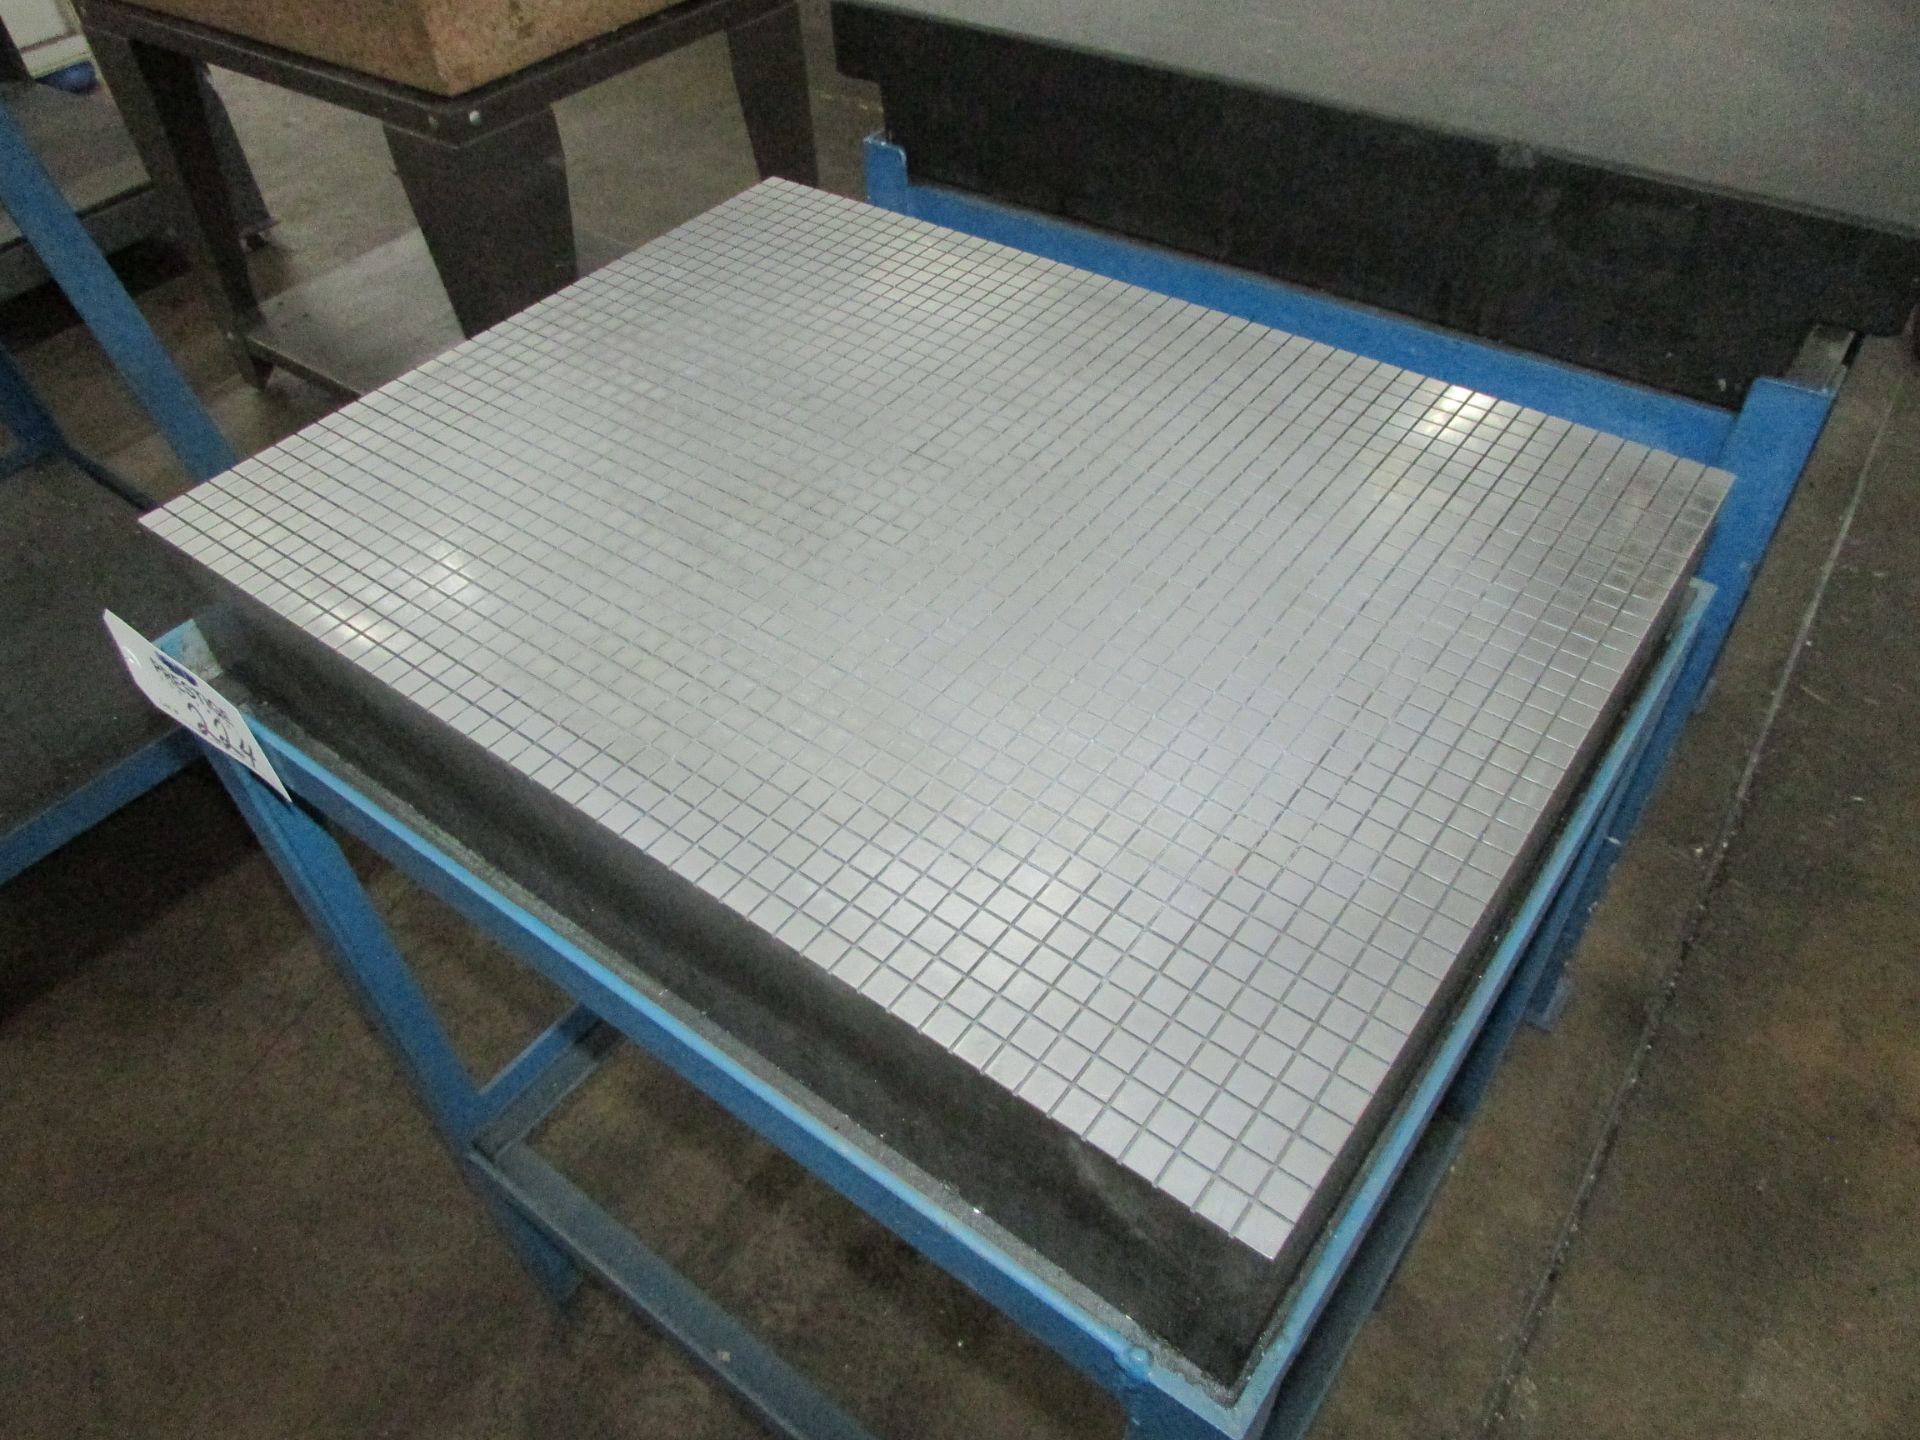 24"x18"x4" Precision Steel Top Machinist Table - Image 2 of 4